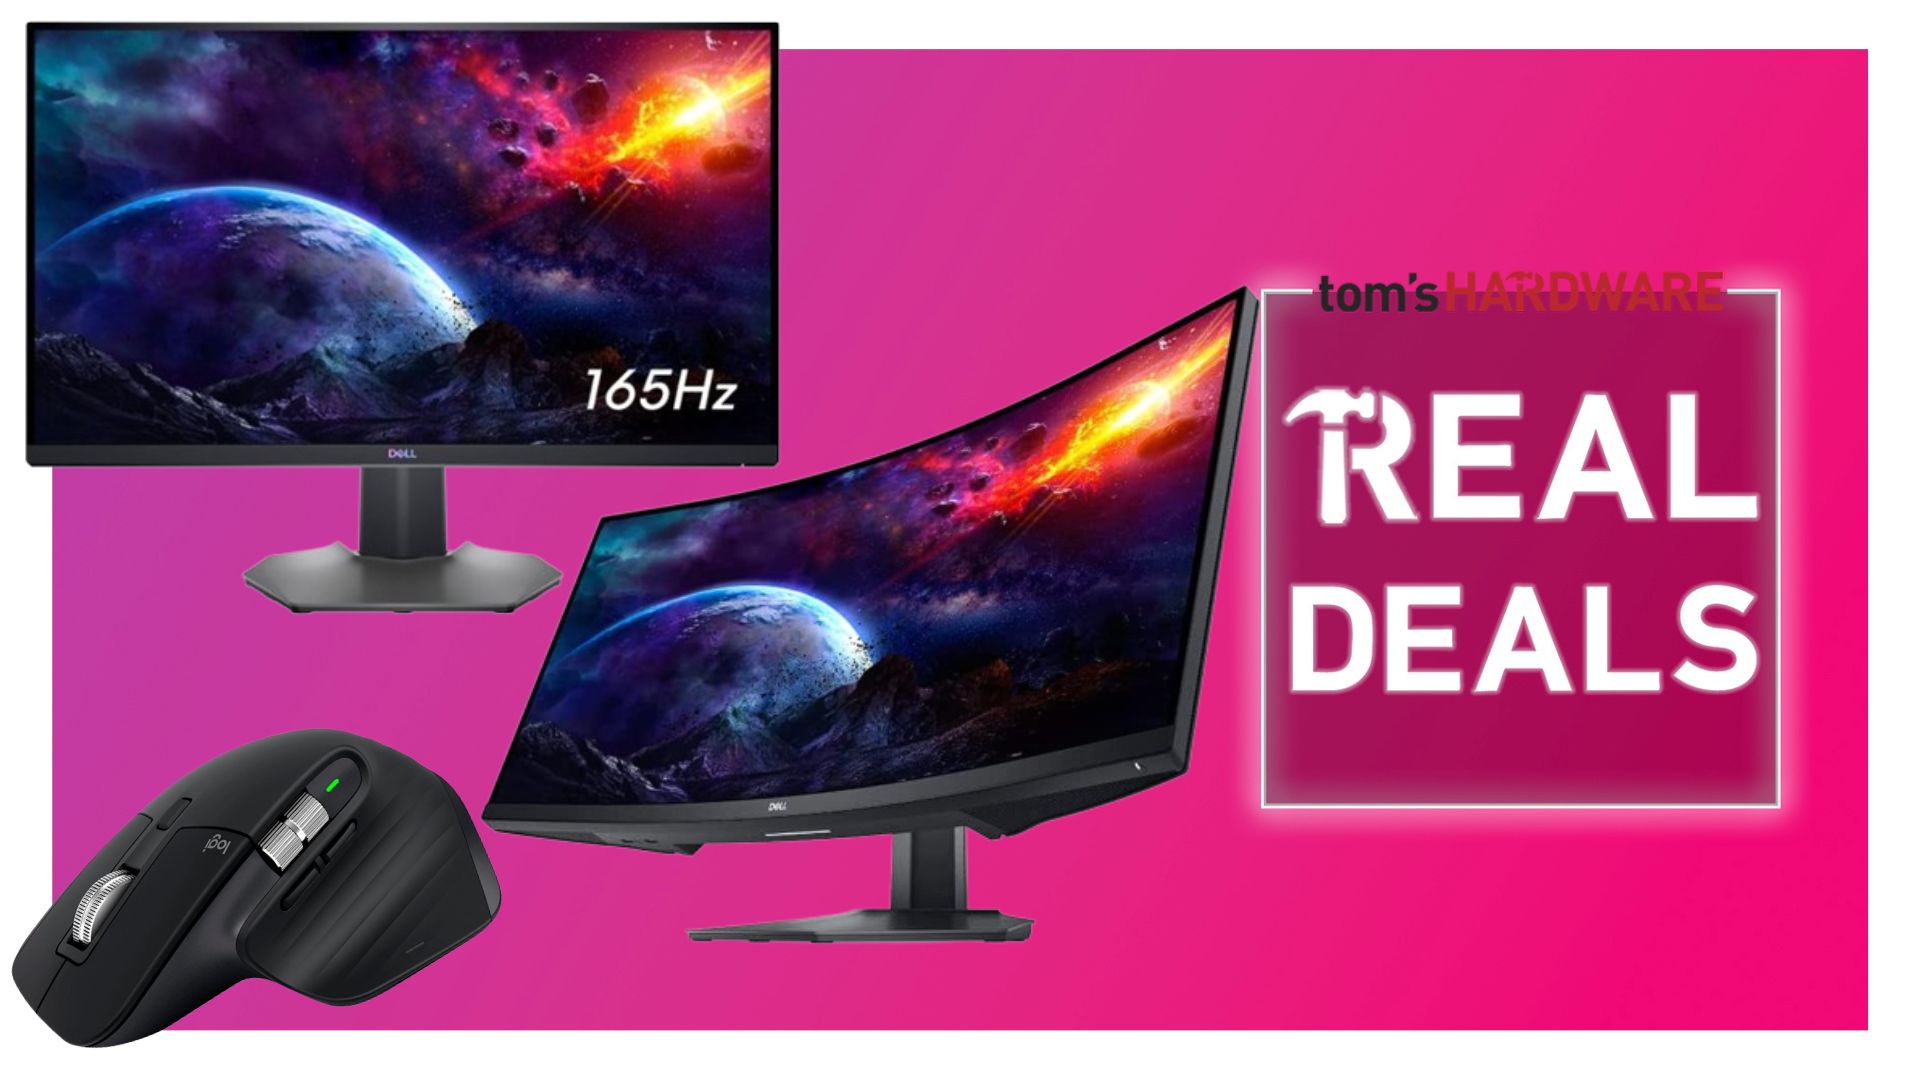 The Brilliant Dell S2721DGF Is Reduced to $269 : Real Deals